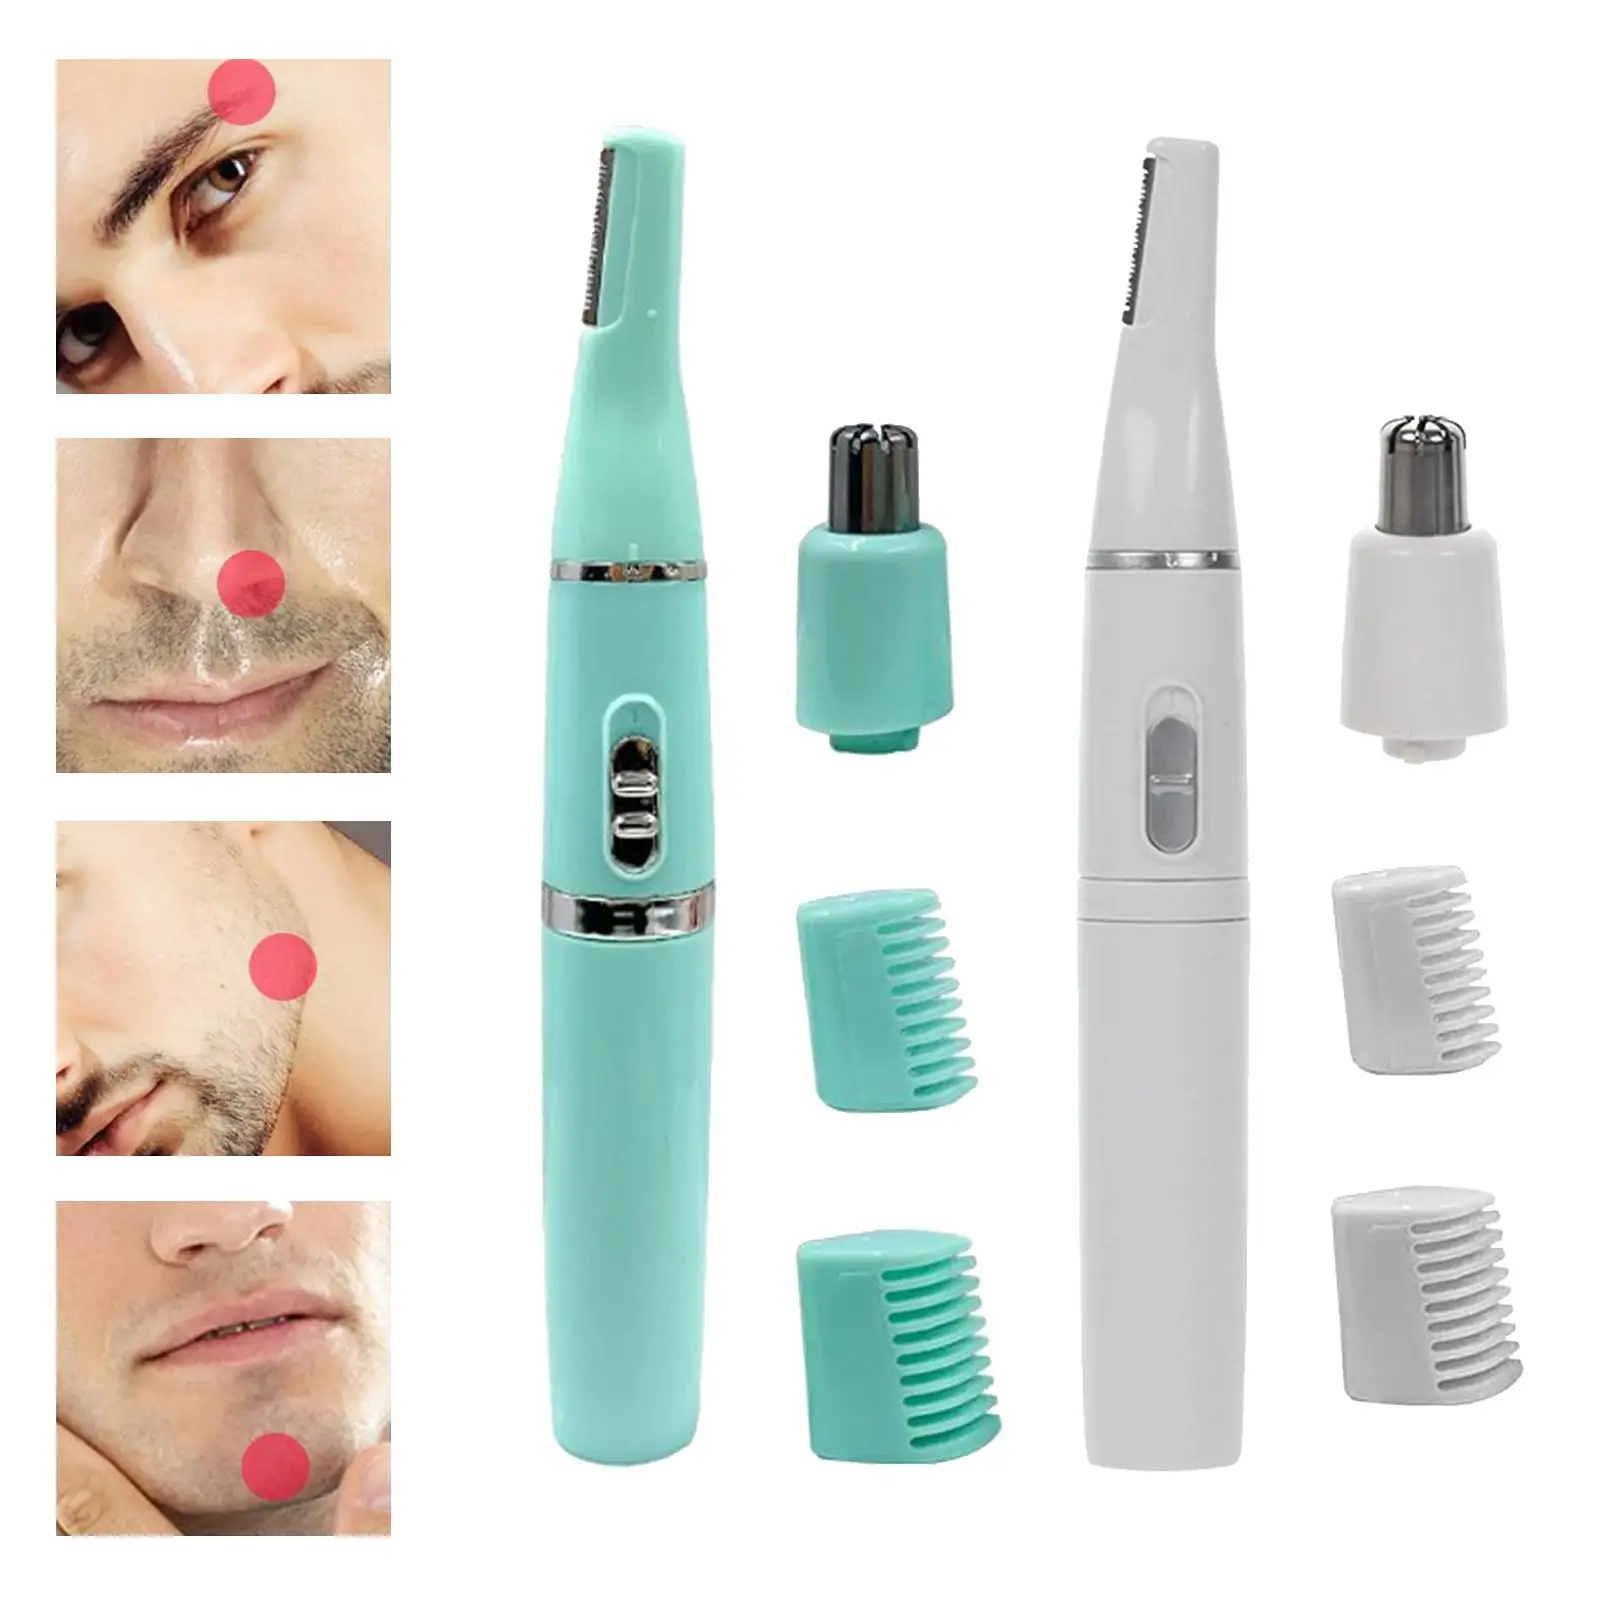 Nose Shaver Trimmer 2 in 1 Portable Painless Clipper Precision Tool for Facial Clean